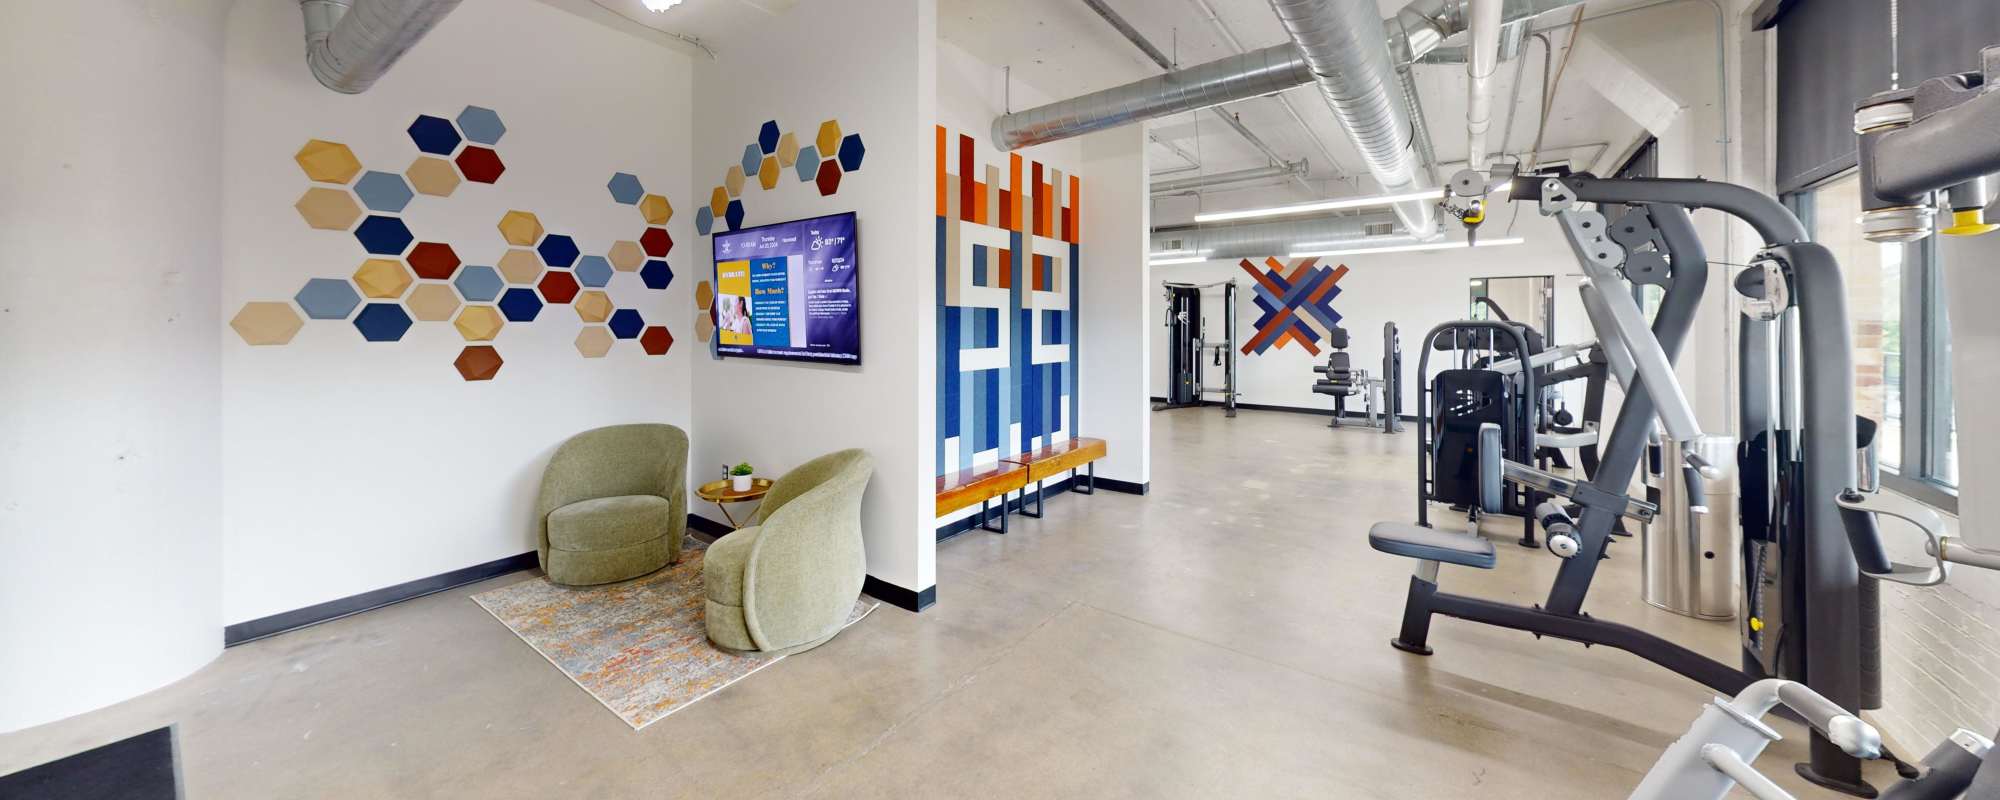 Residential Fitness Center at Factory 52 Apartments in Norwood, OH